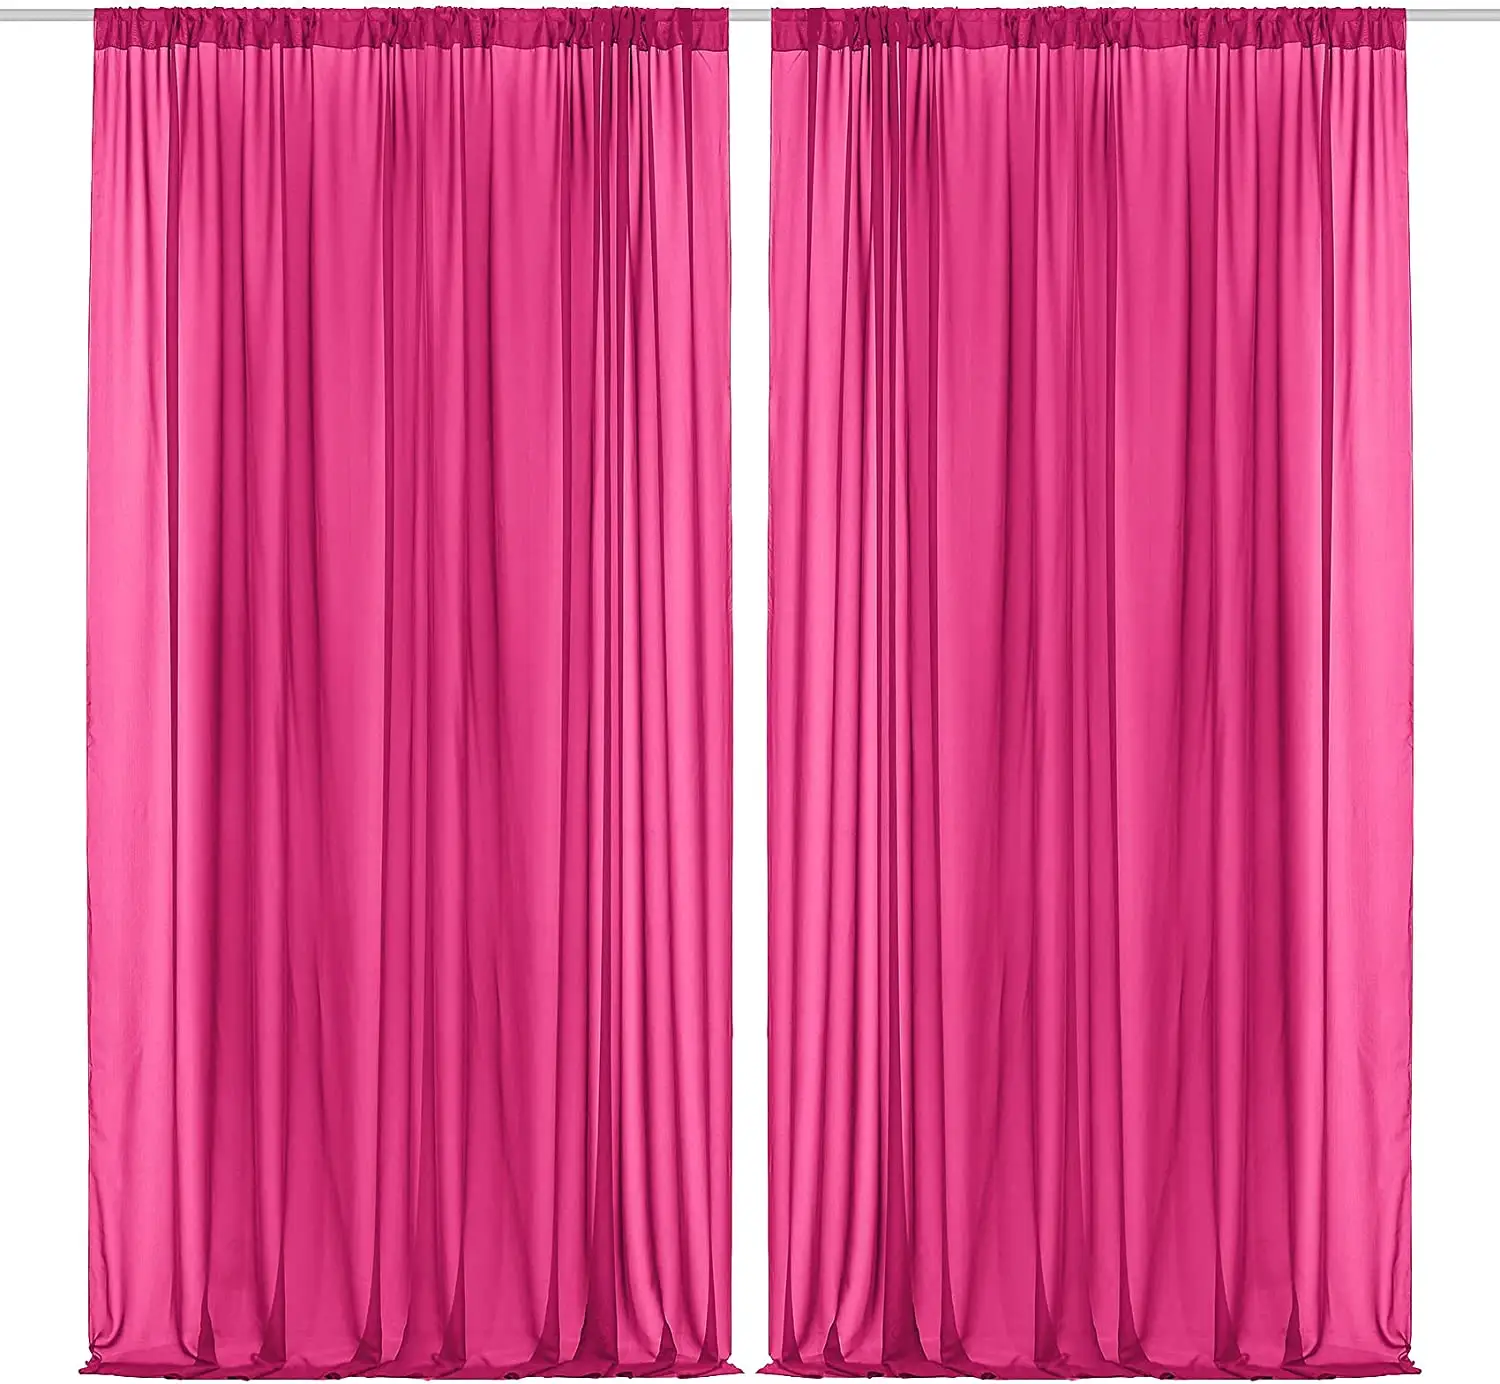 2pcs 5x10feet Chiffon Photography Backdrop Drapes Sheer Curtains Panels with Rod Pockets for Wedding Baby Shower Birthday Party